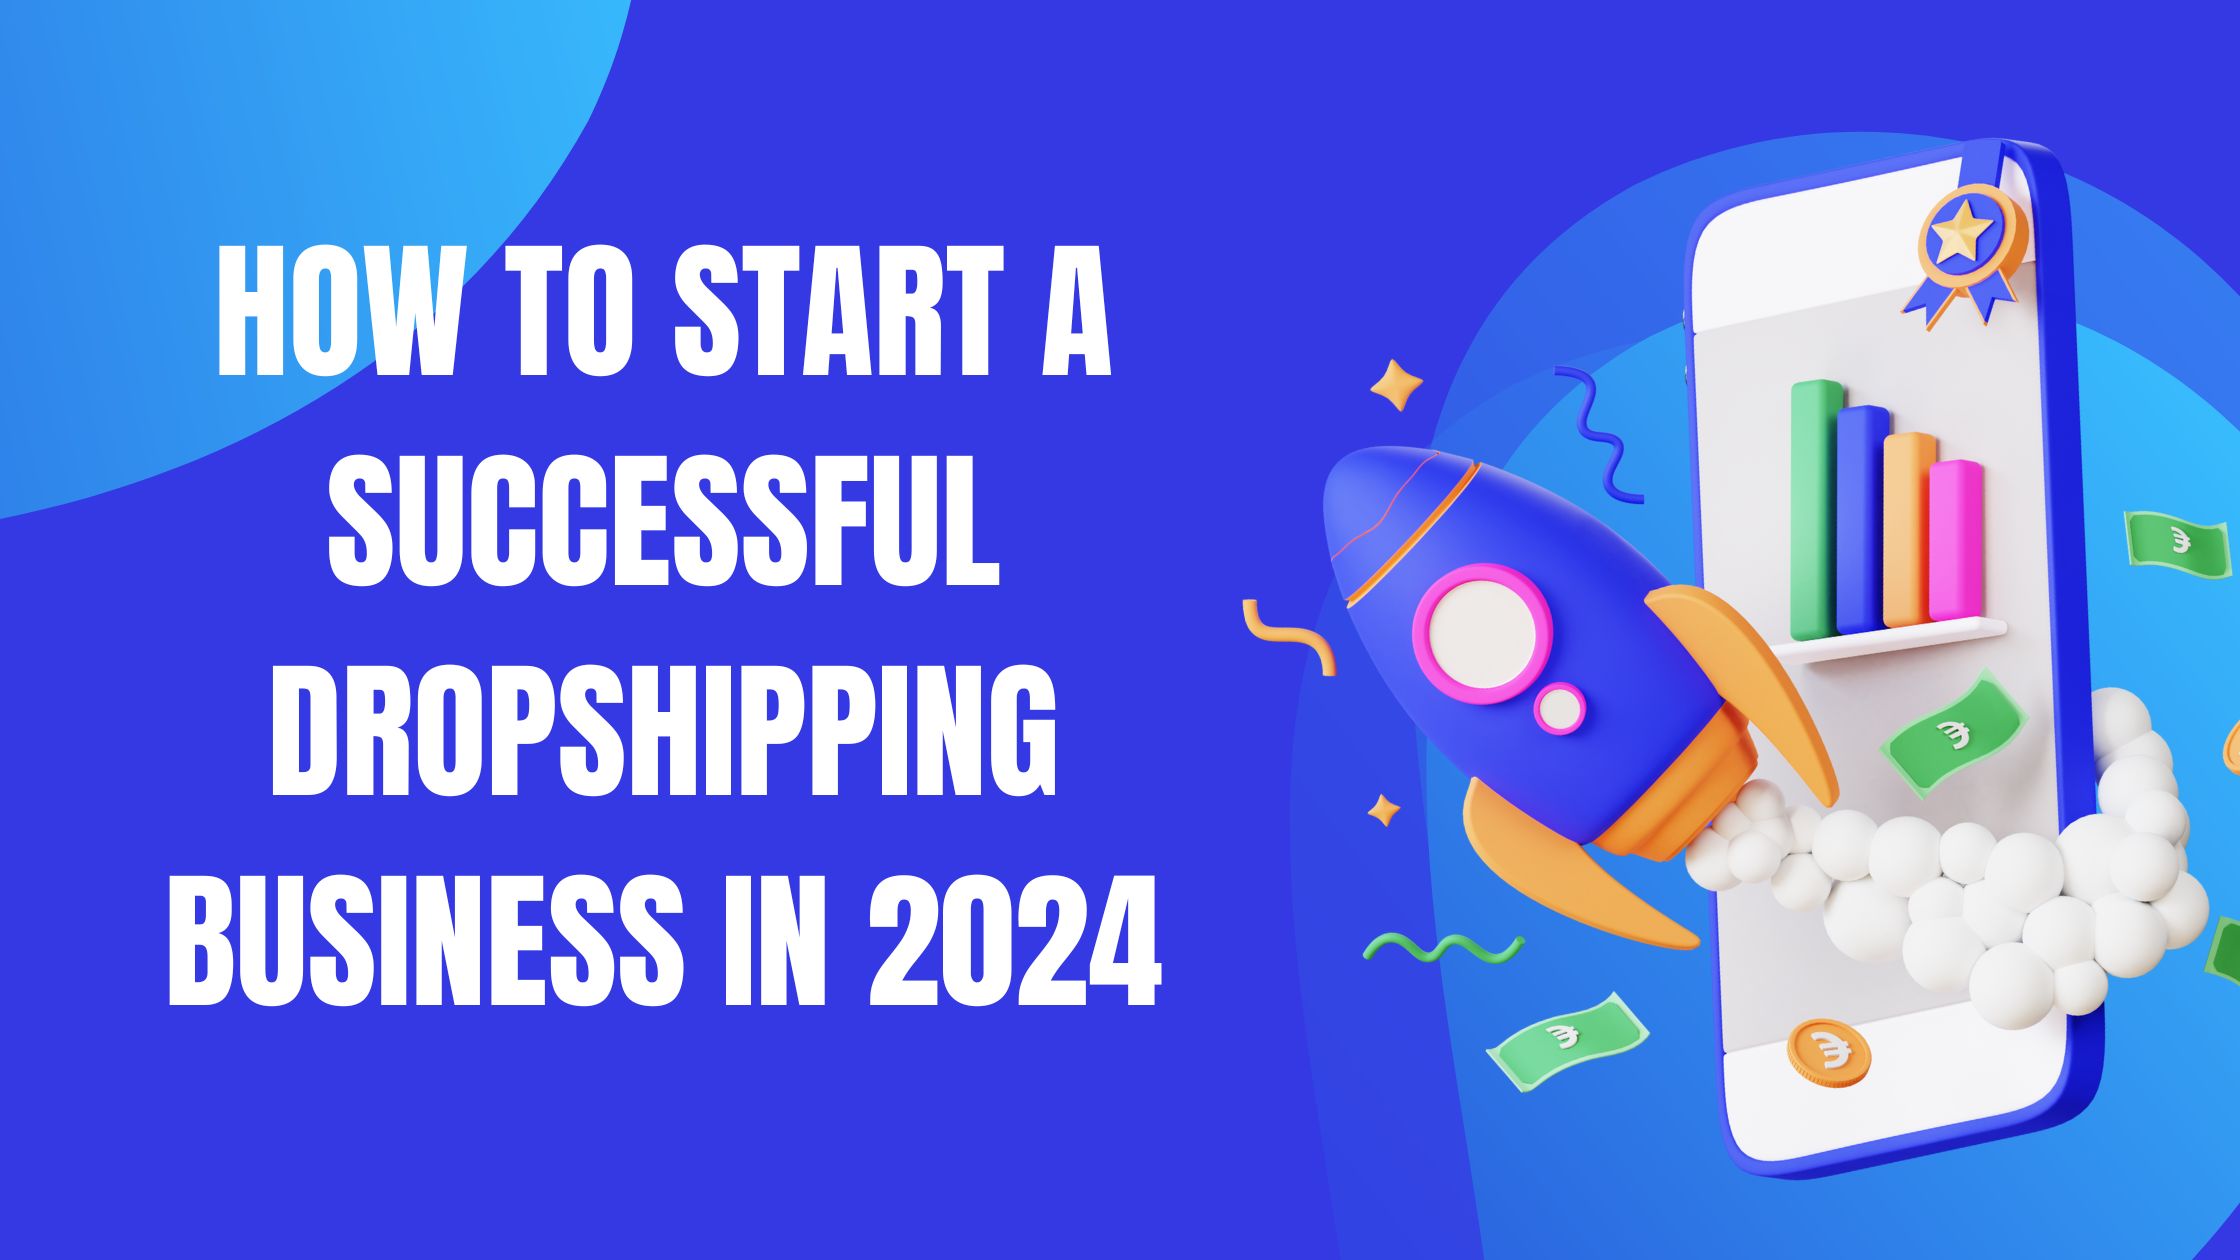 How to Start a Successful Dropshipping Business In 2024